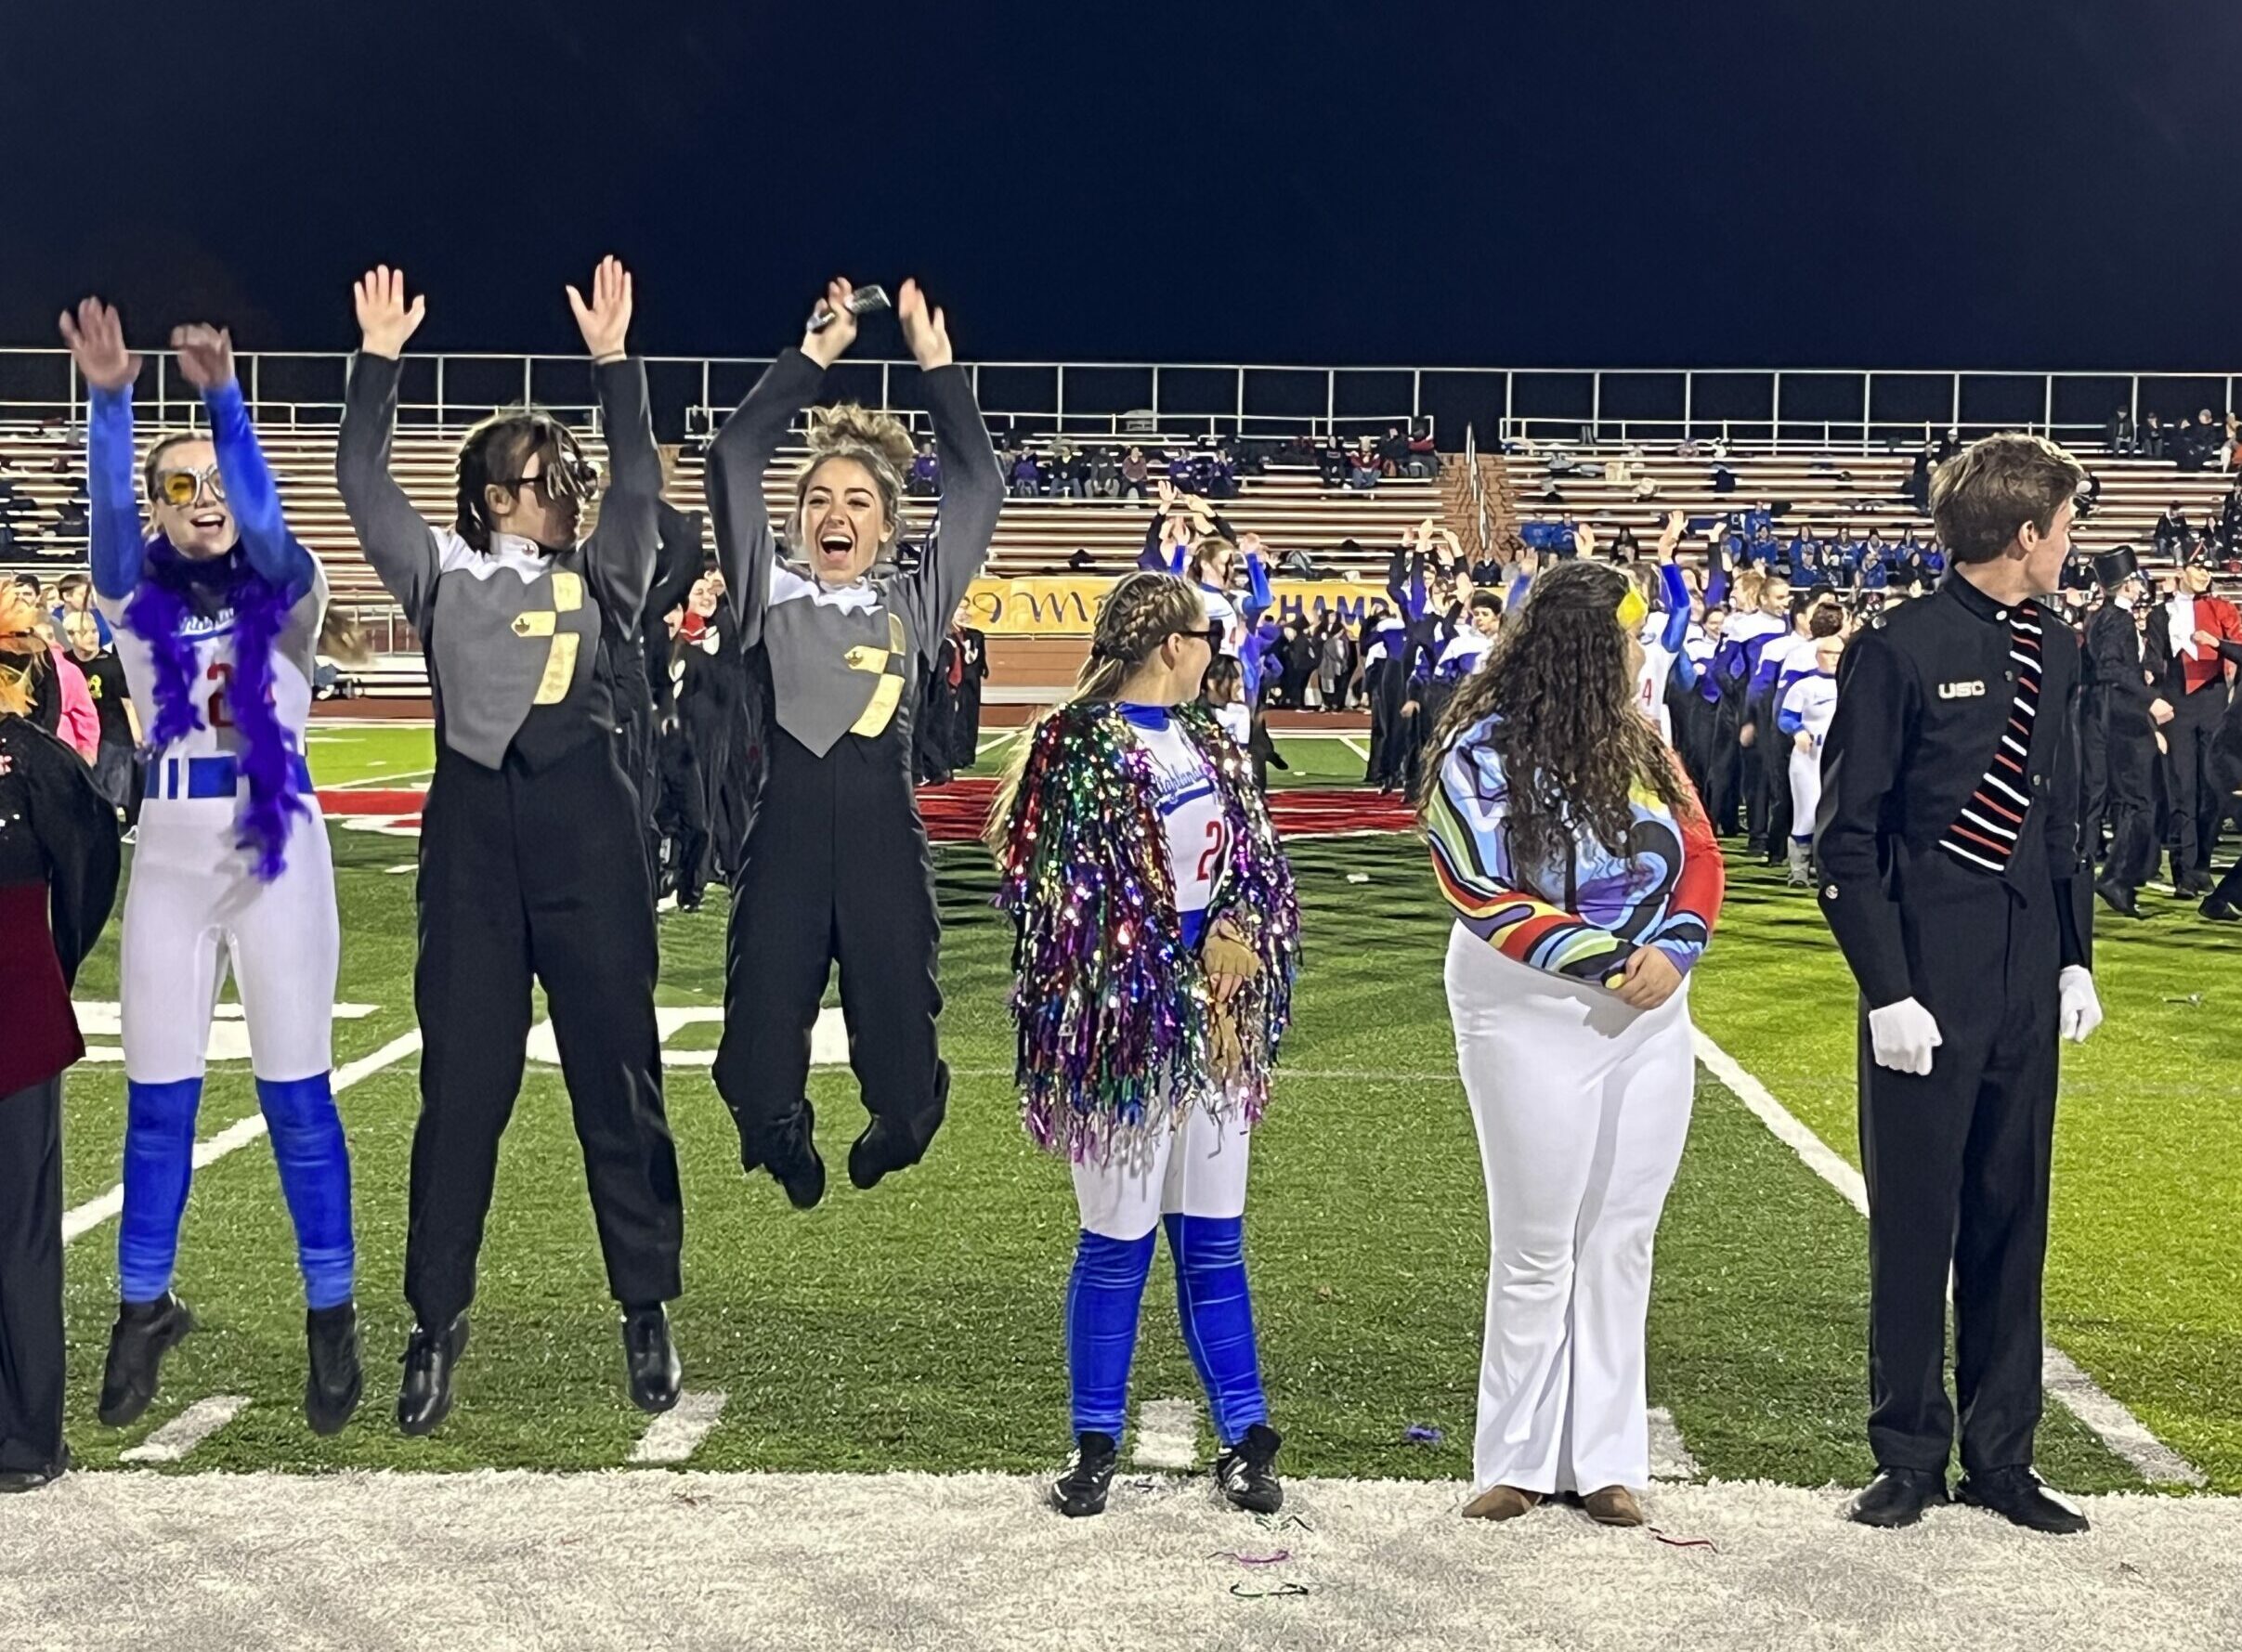 On a high note PIMBA's Moon championships close out district marching